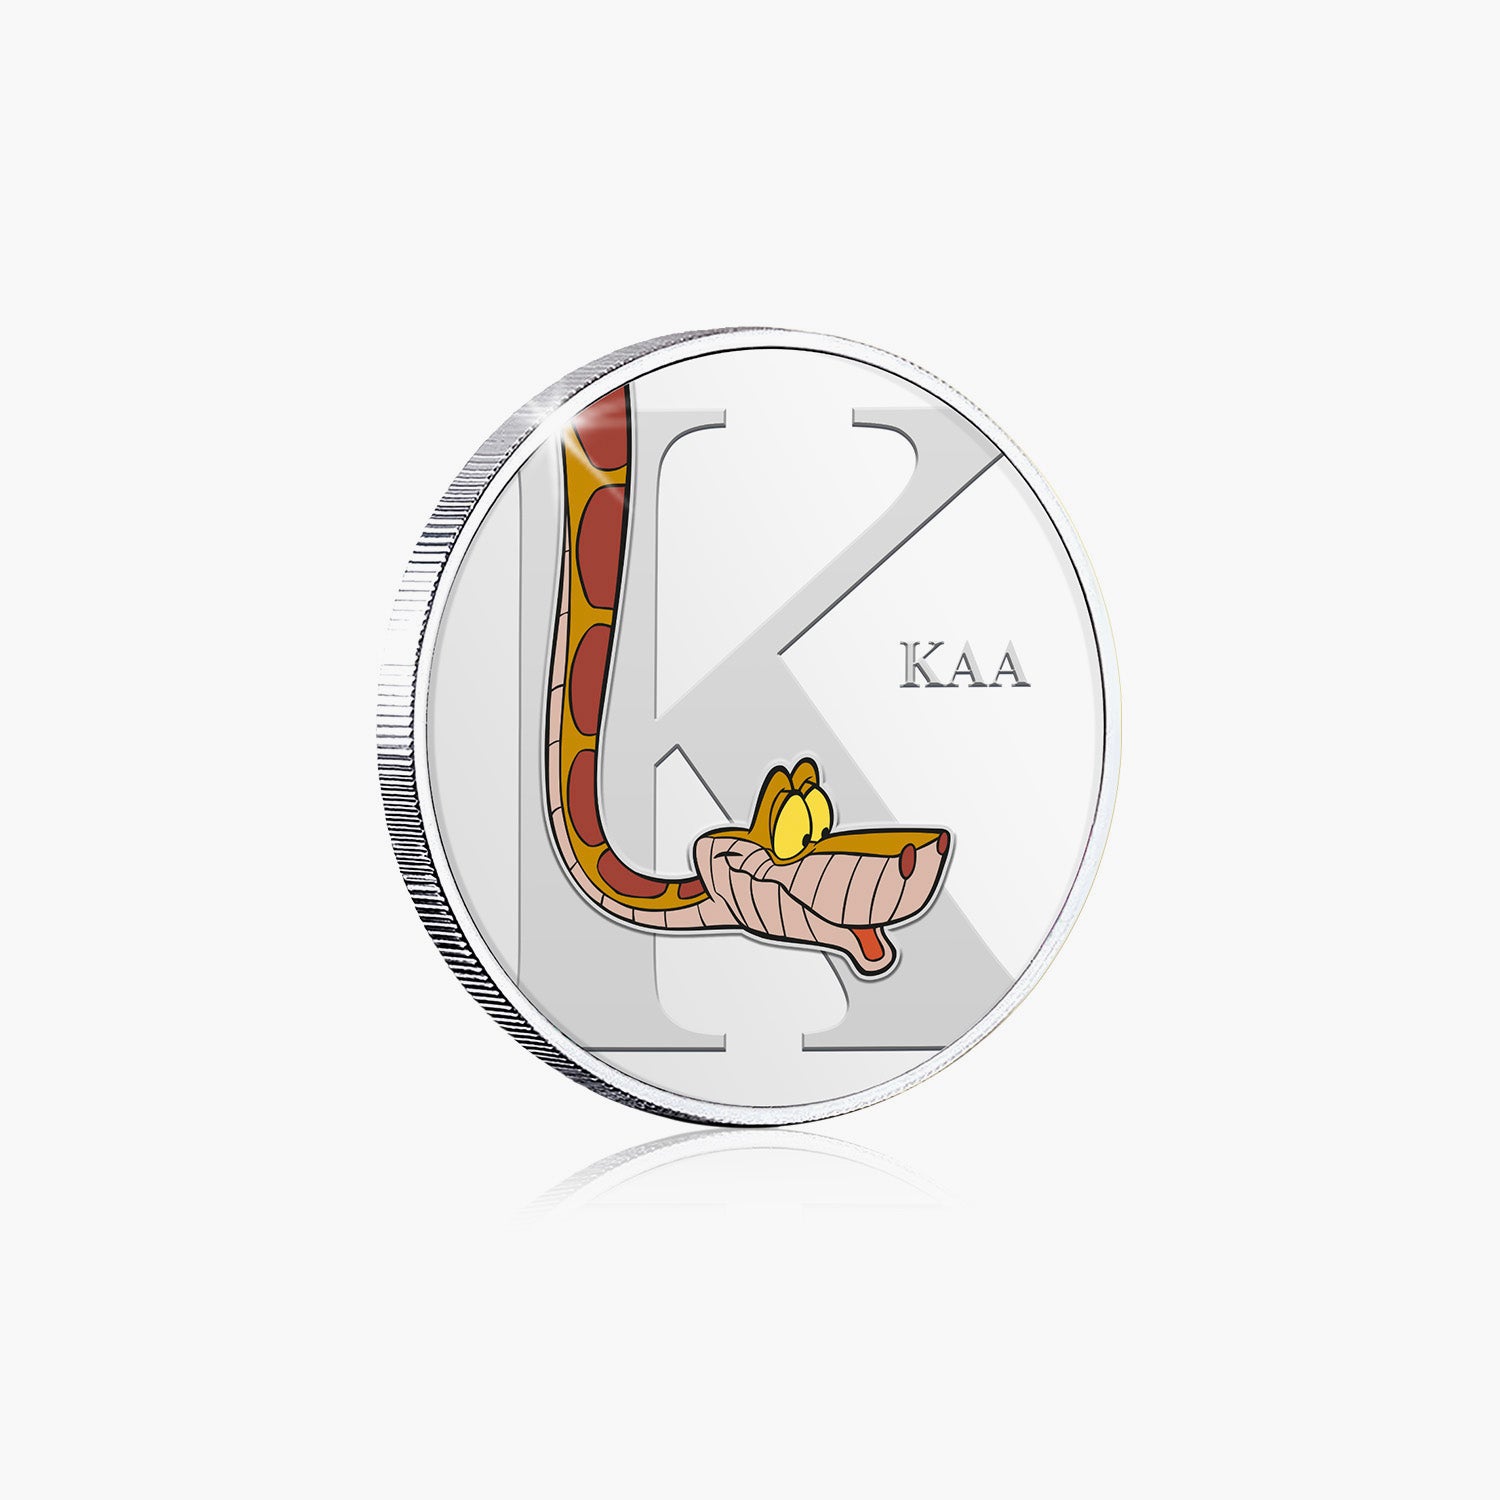 K is for Kaa Silver-Plated Full Colour Commemorative